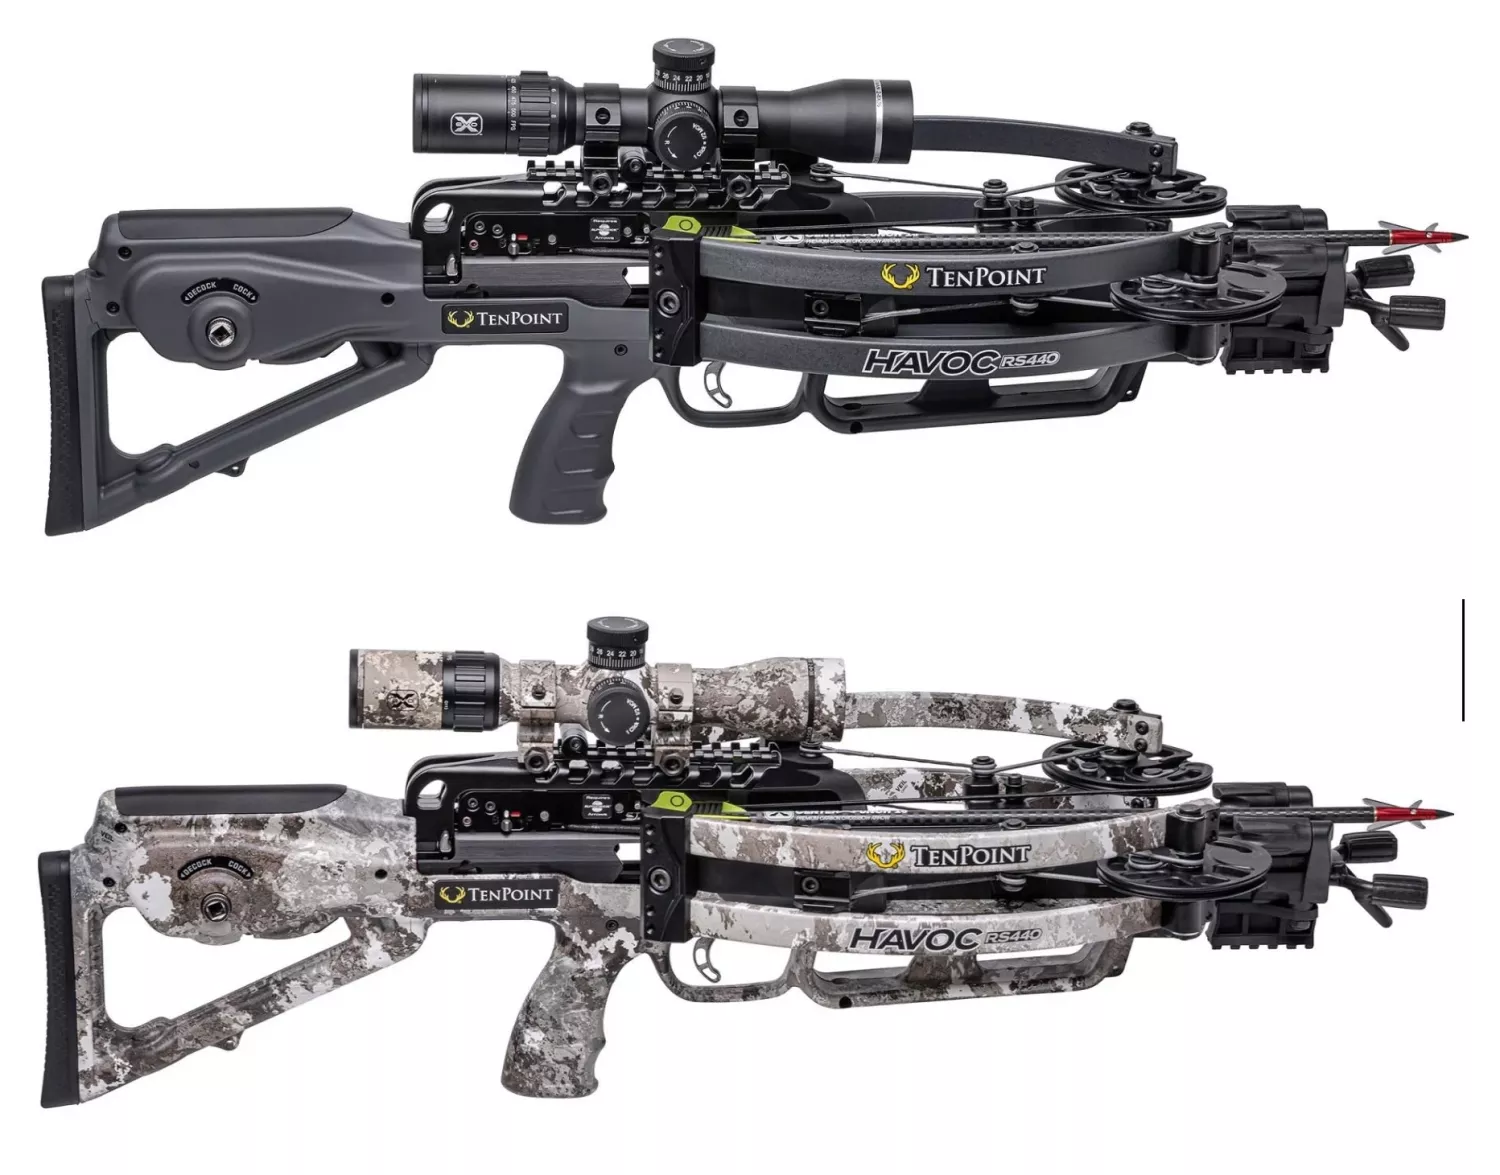 TenPoint Havoc RS440 440 FPS ACUslide Crossbow Package with EVO-X Elite Scope Graphite/Camo - $1999.99/$2099.99 w/code "TENPOINT500" (Free S/H)